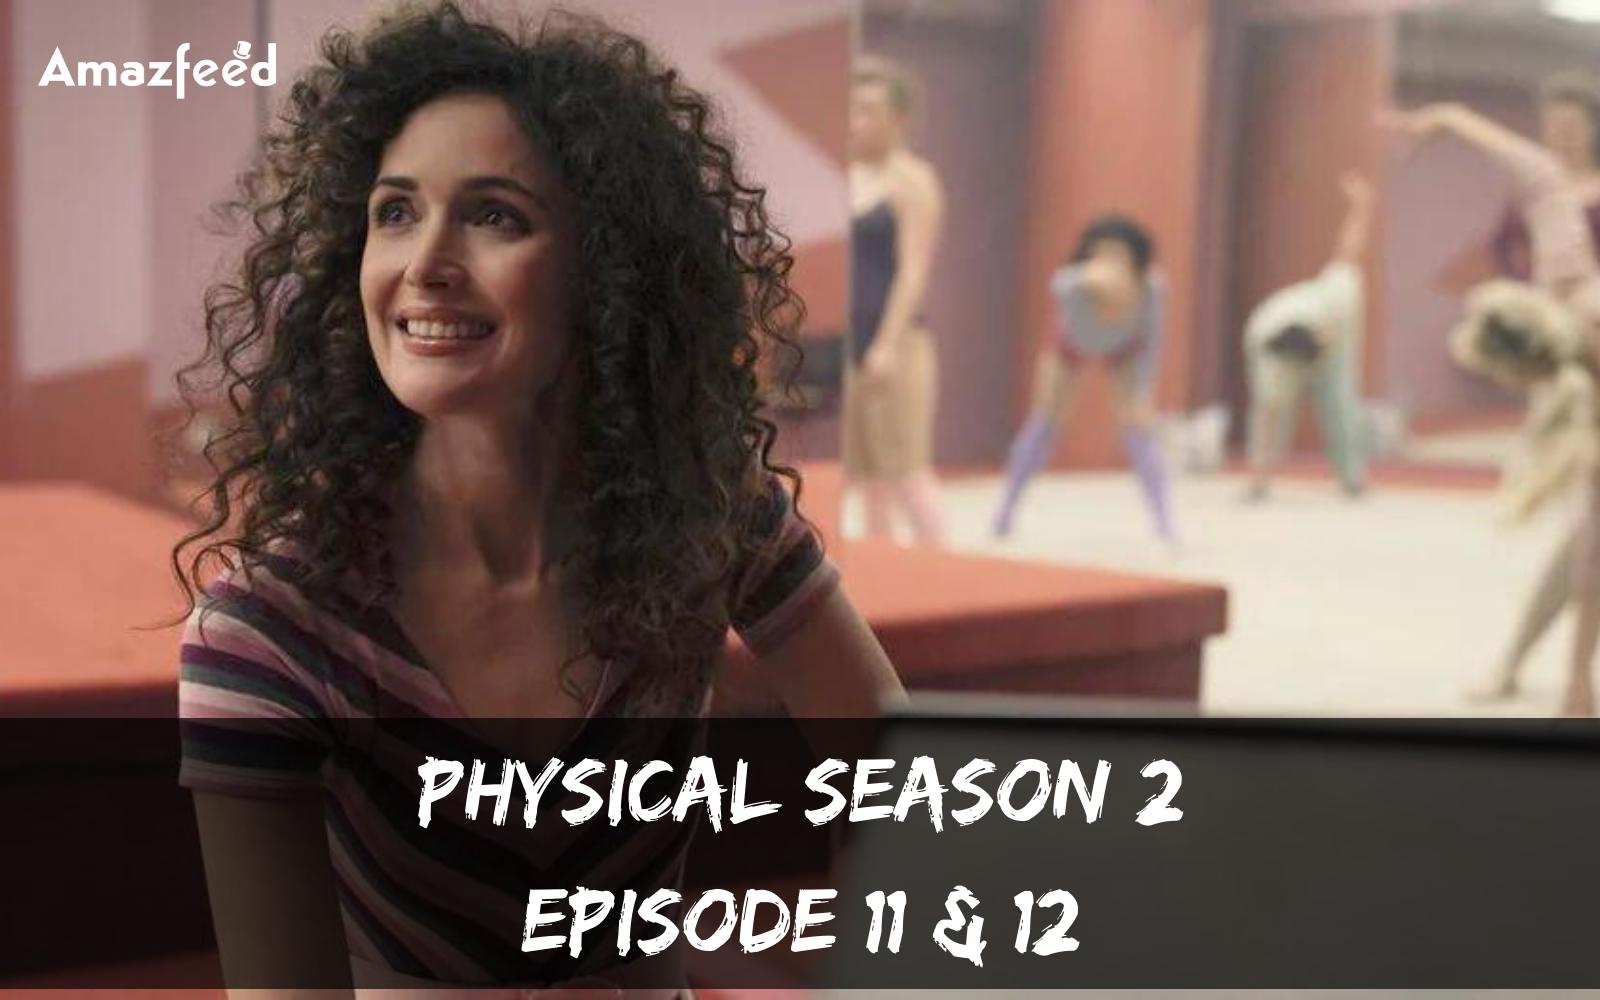 Physical Season 2 Episode 11 & 12 : Is the series Physical ended? Release Dates, Recaps, News Updates